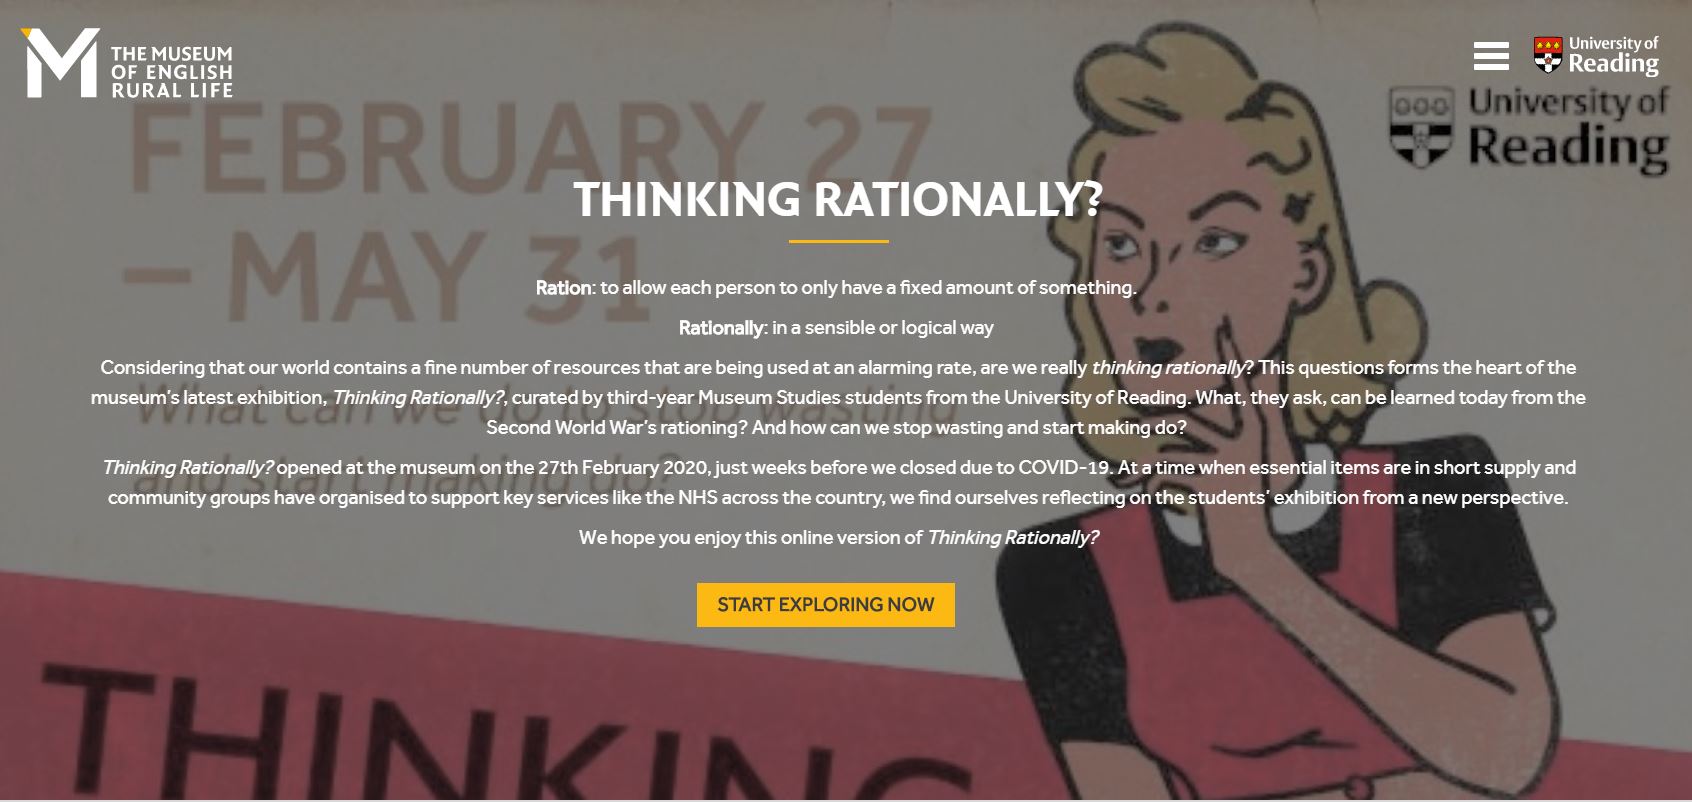 First page of the Thinking Rationally online exhibition at the MERL with descriptive text over a picture of a woman dressed in 1940s style